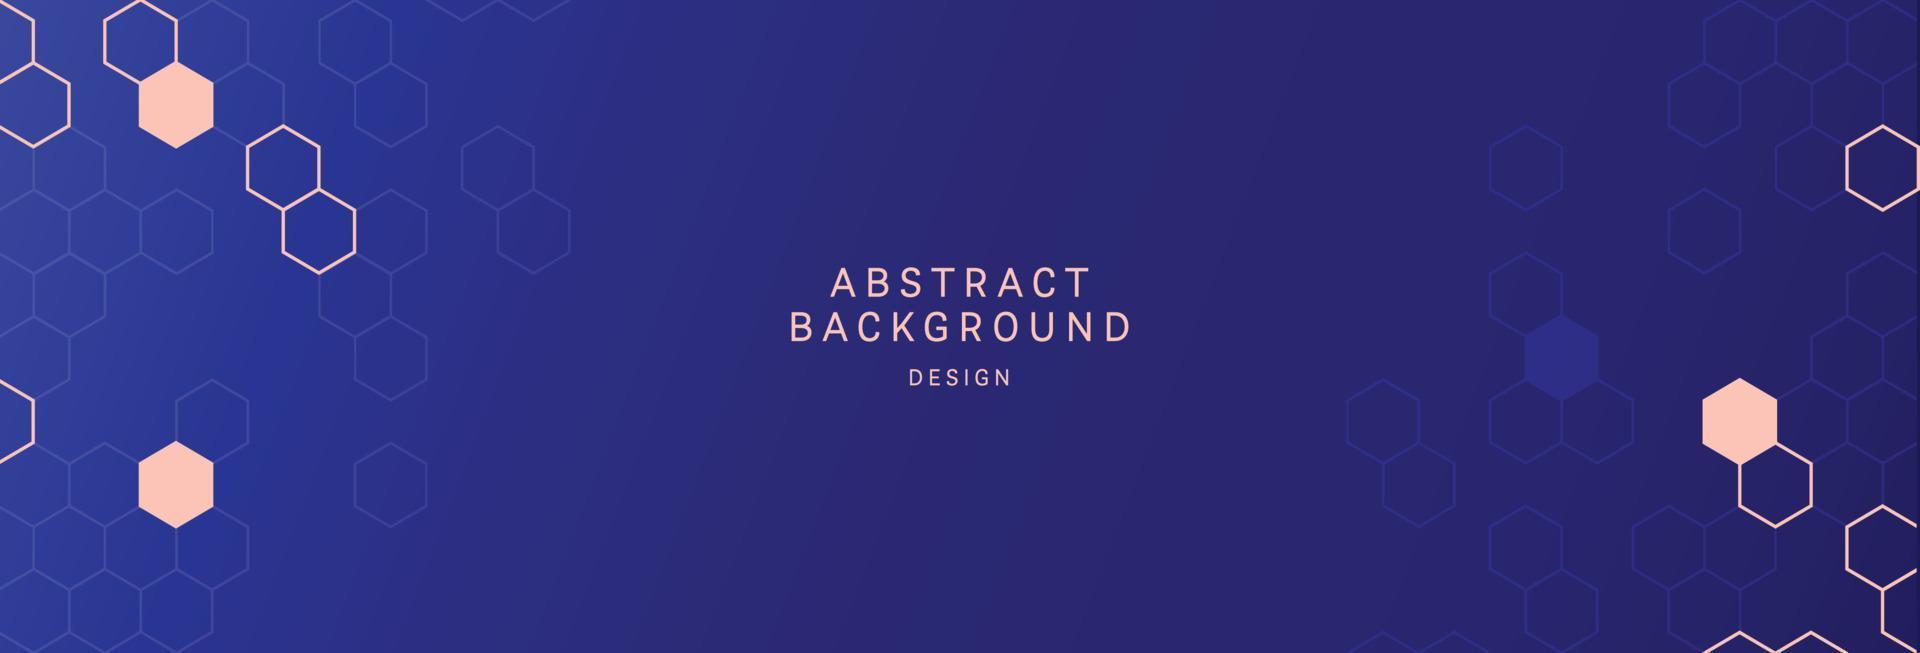 Trendy background with the theme of modern technology. Abstract wallpapers with panoramic styles for poster templates, banners, and other graphic designs. vector